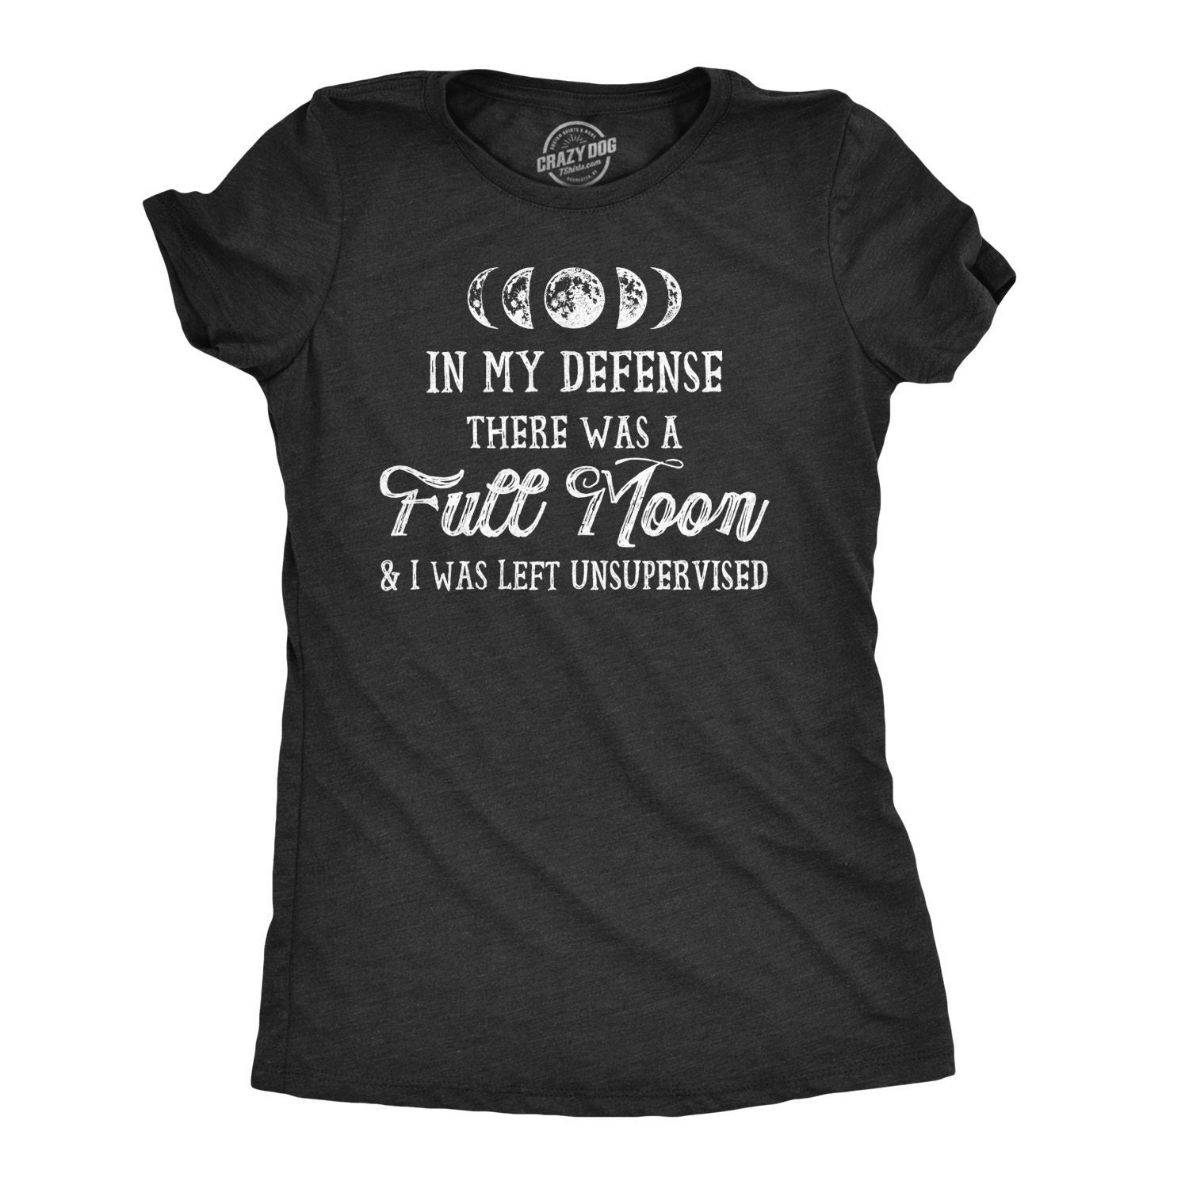 My Defense Full Moon and Left Unsupervised Shirt